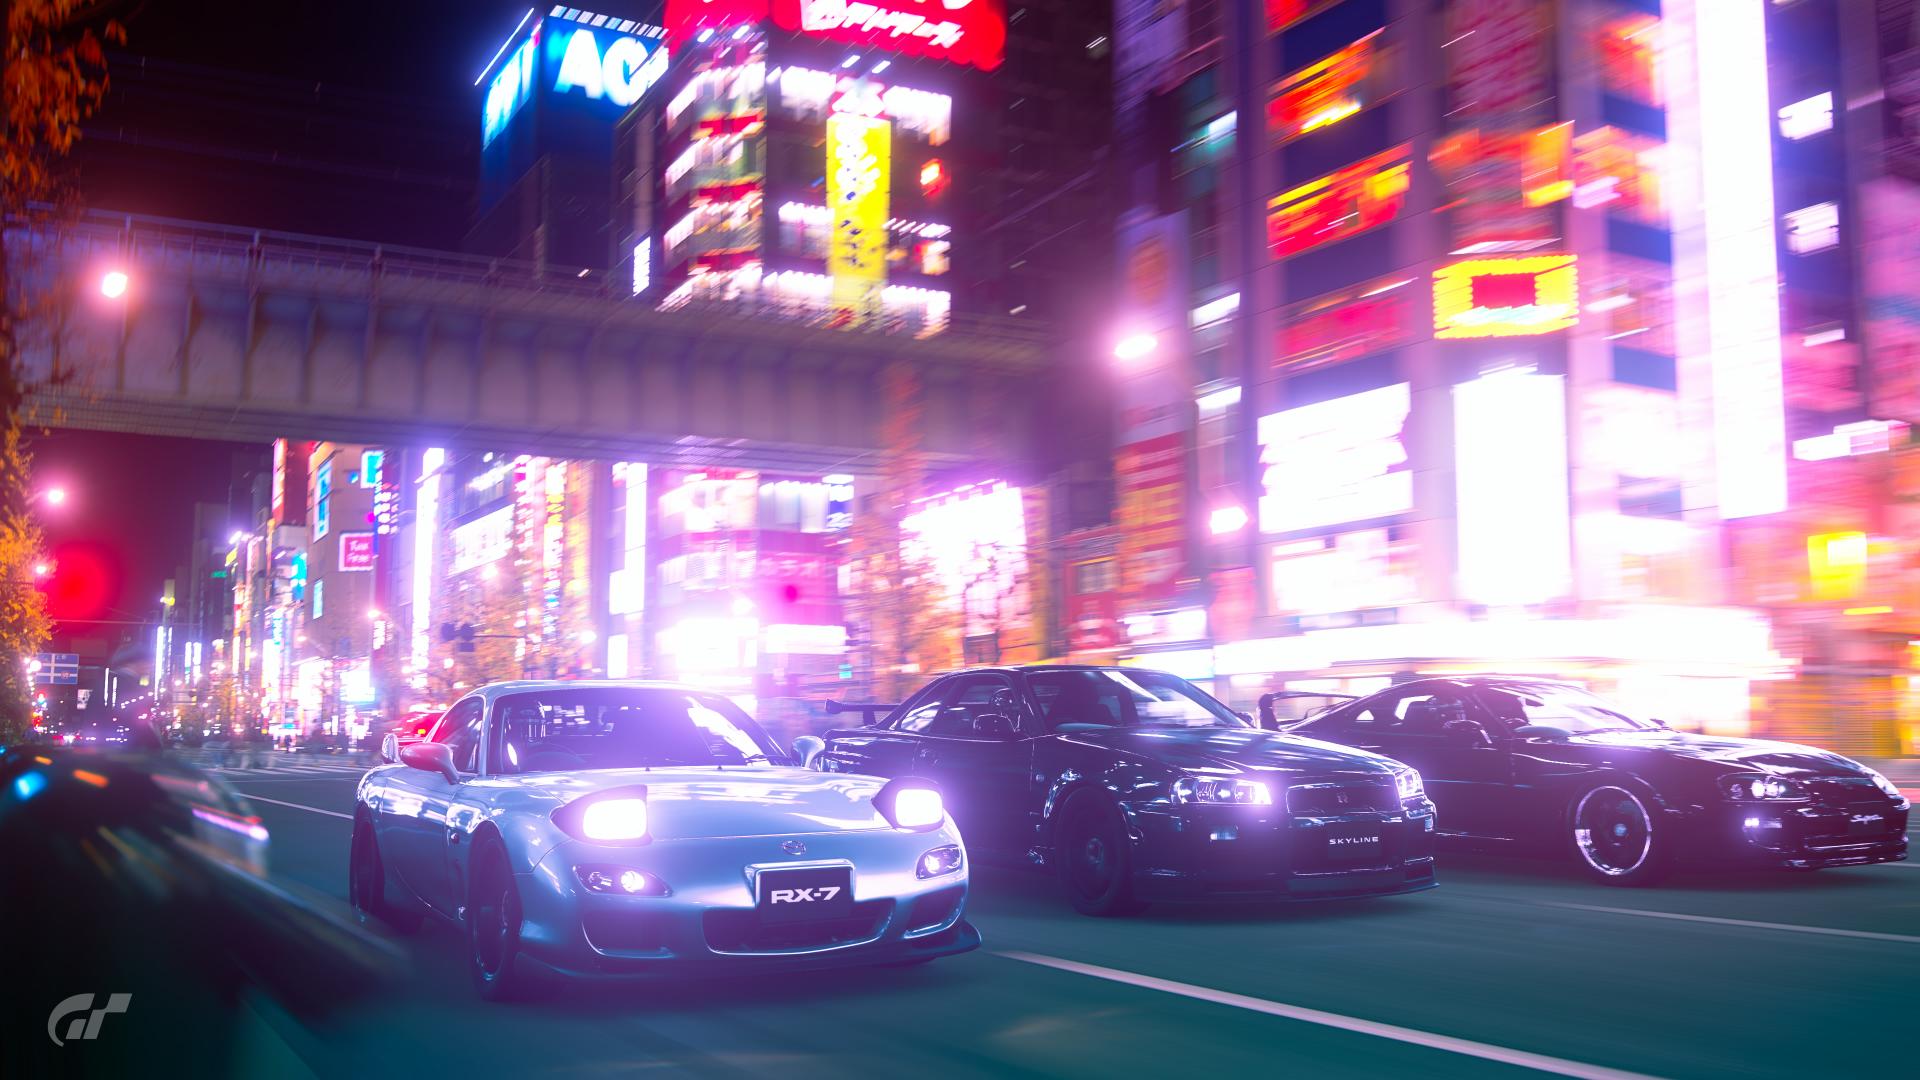 Neon Jdm Wallpaper, Nissan Silvia S15 Crystal City Car Blue Neon 2013 HD Ginza 1486168 HD Wallpaper Background Download free jdm ringtones and wallpaper on zedge and personalize your